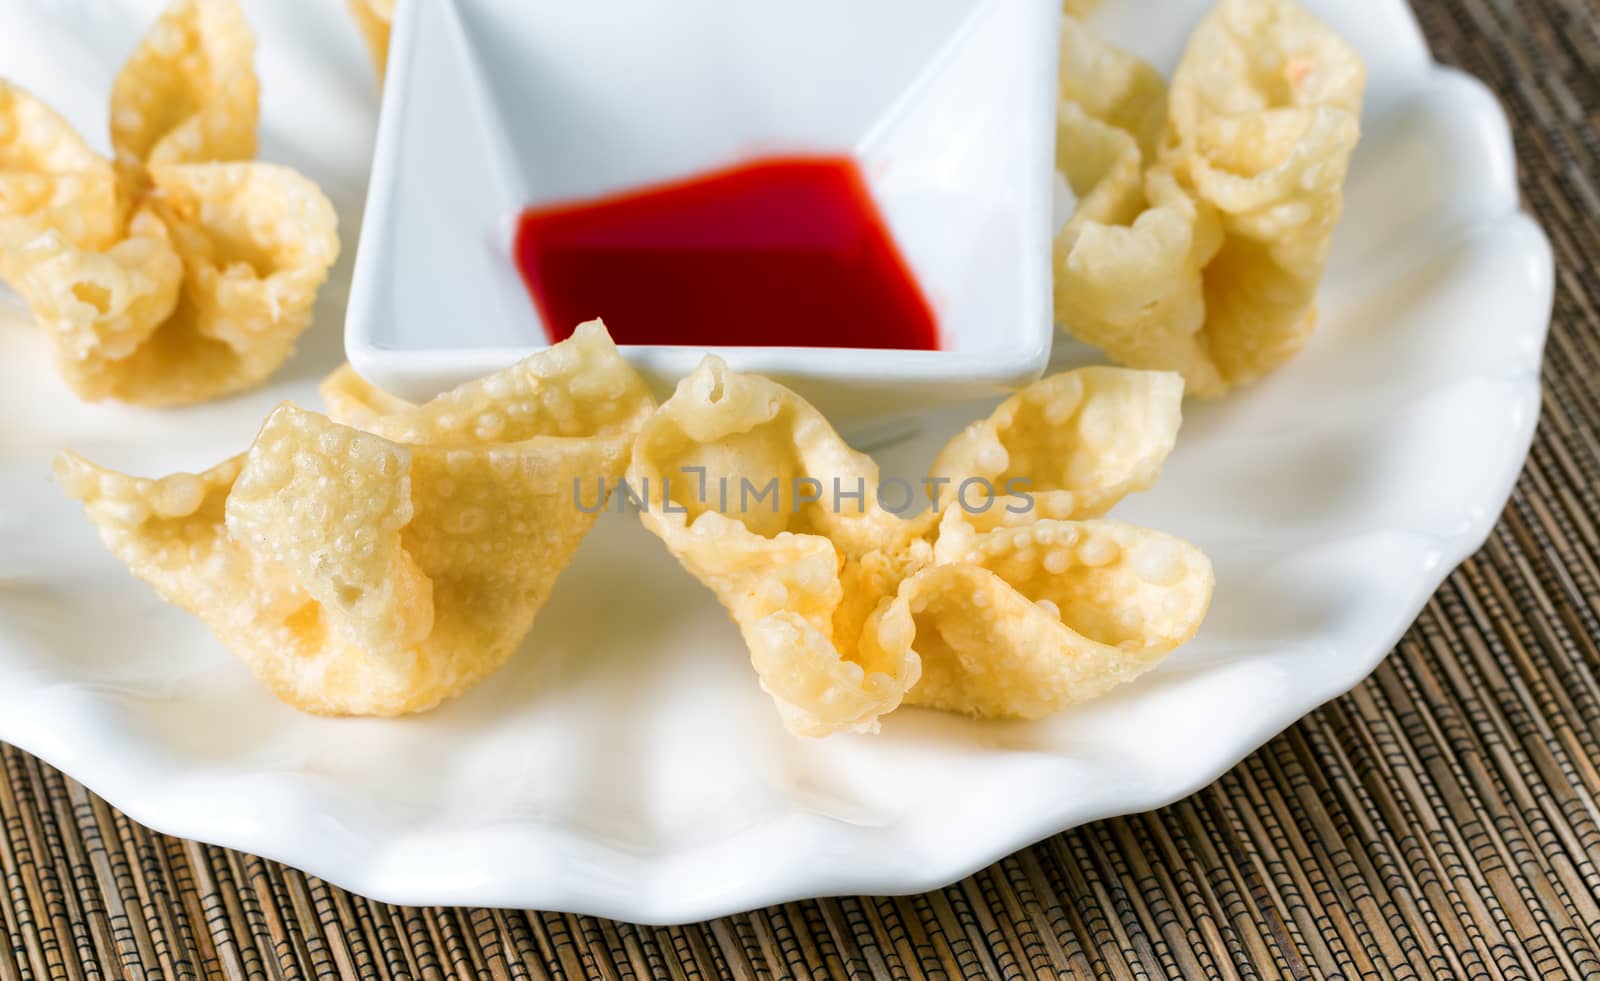 Close up view of crispy fried wanton treats with dipping sauce in background. Selective focus on front shells. 